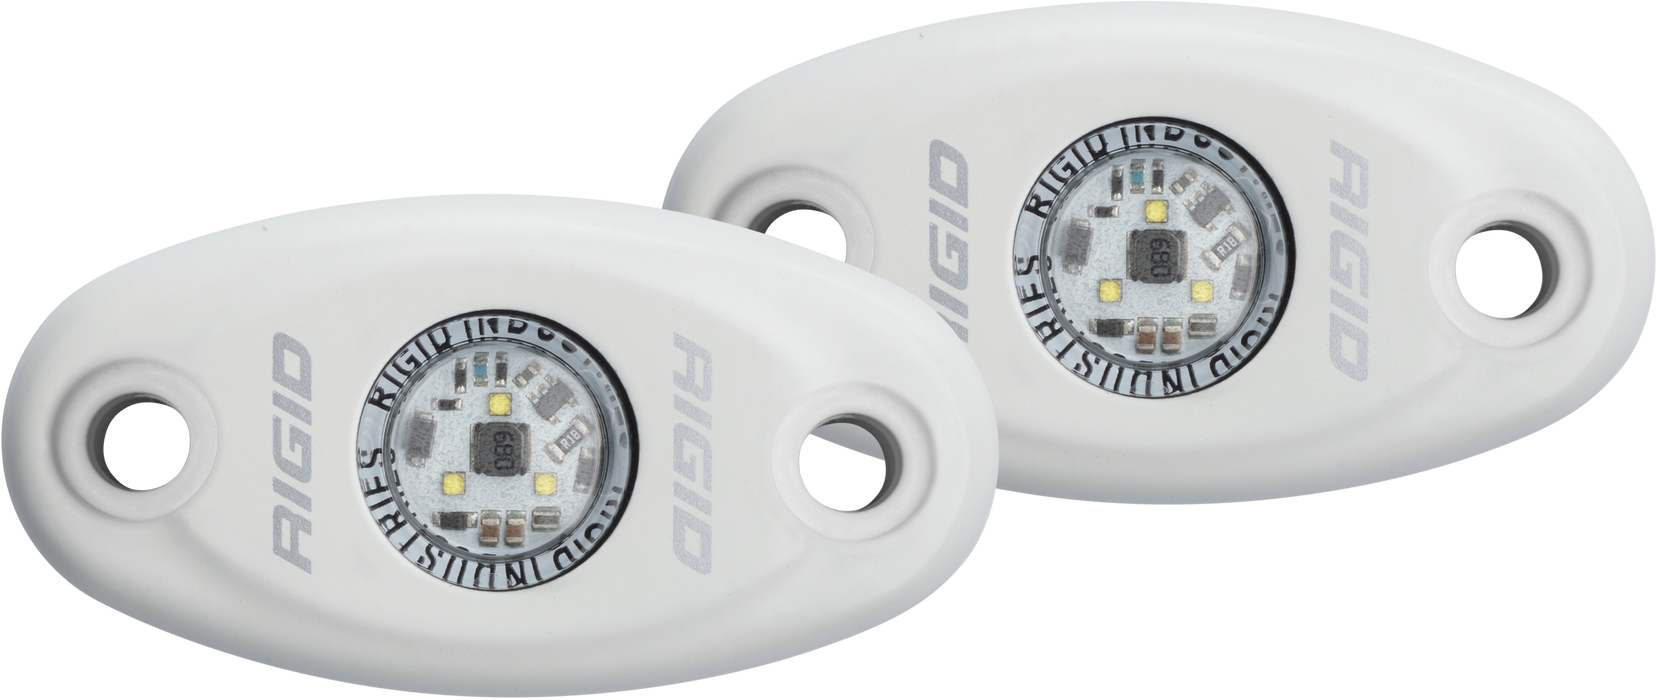 Rigid Industries A-Series Light - White - Low Strength - Cool White - Set of 2